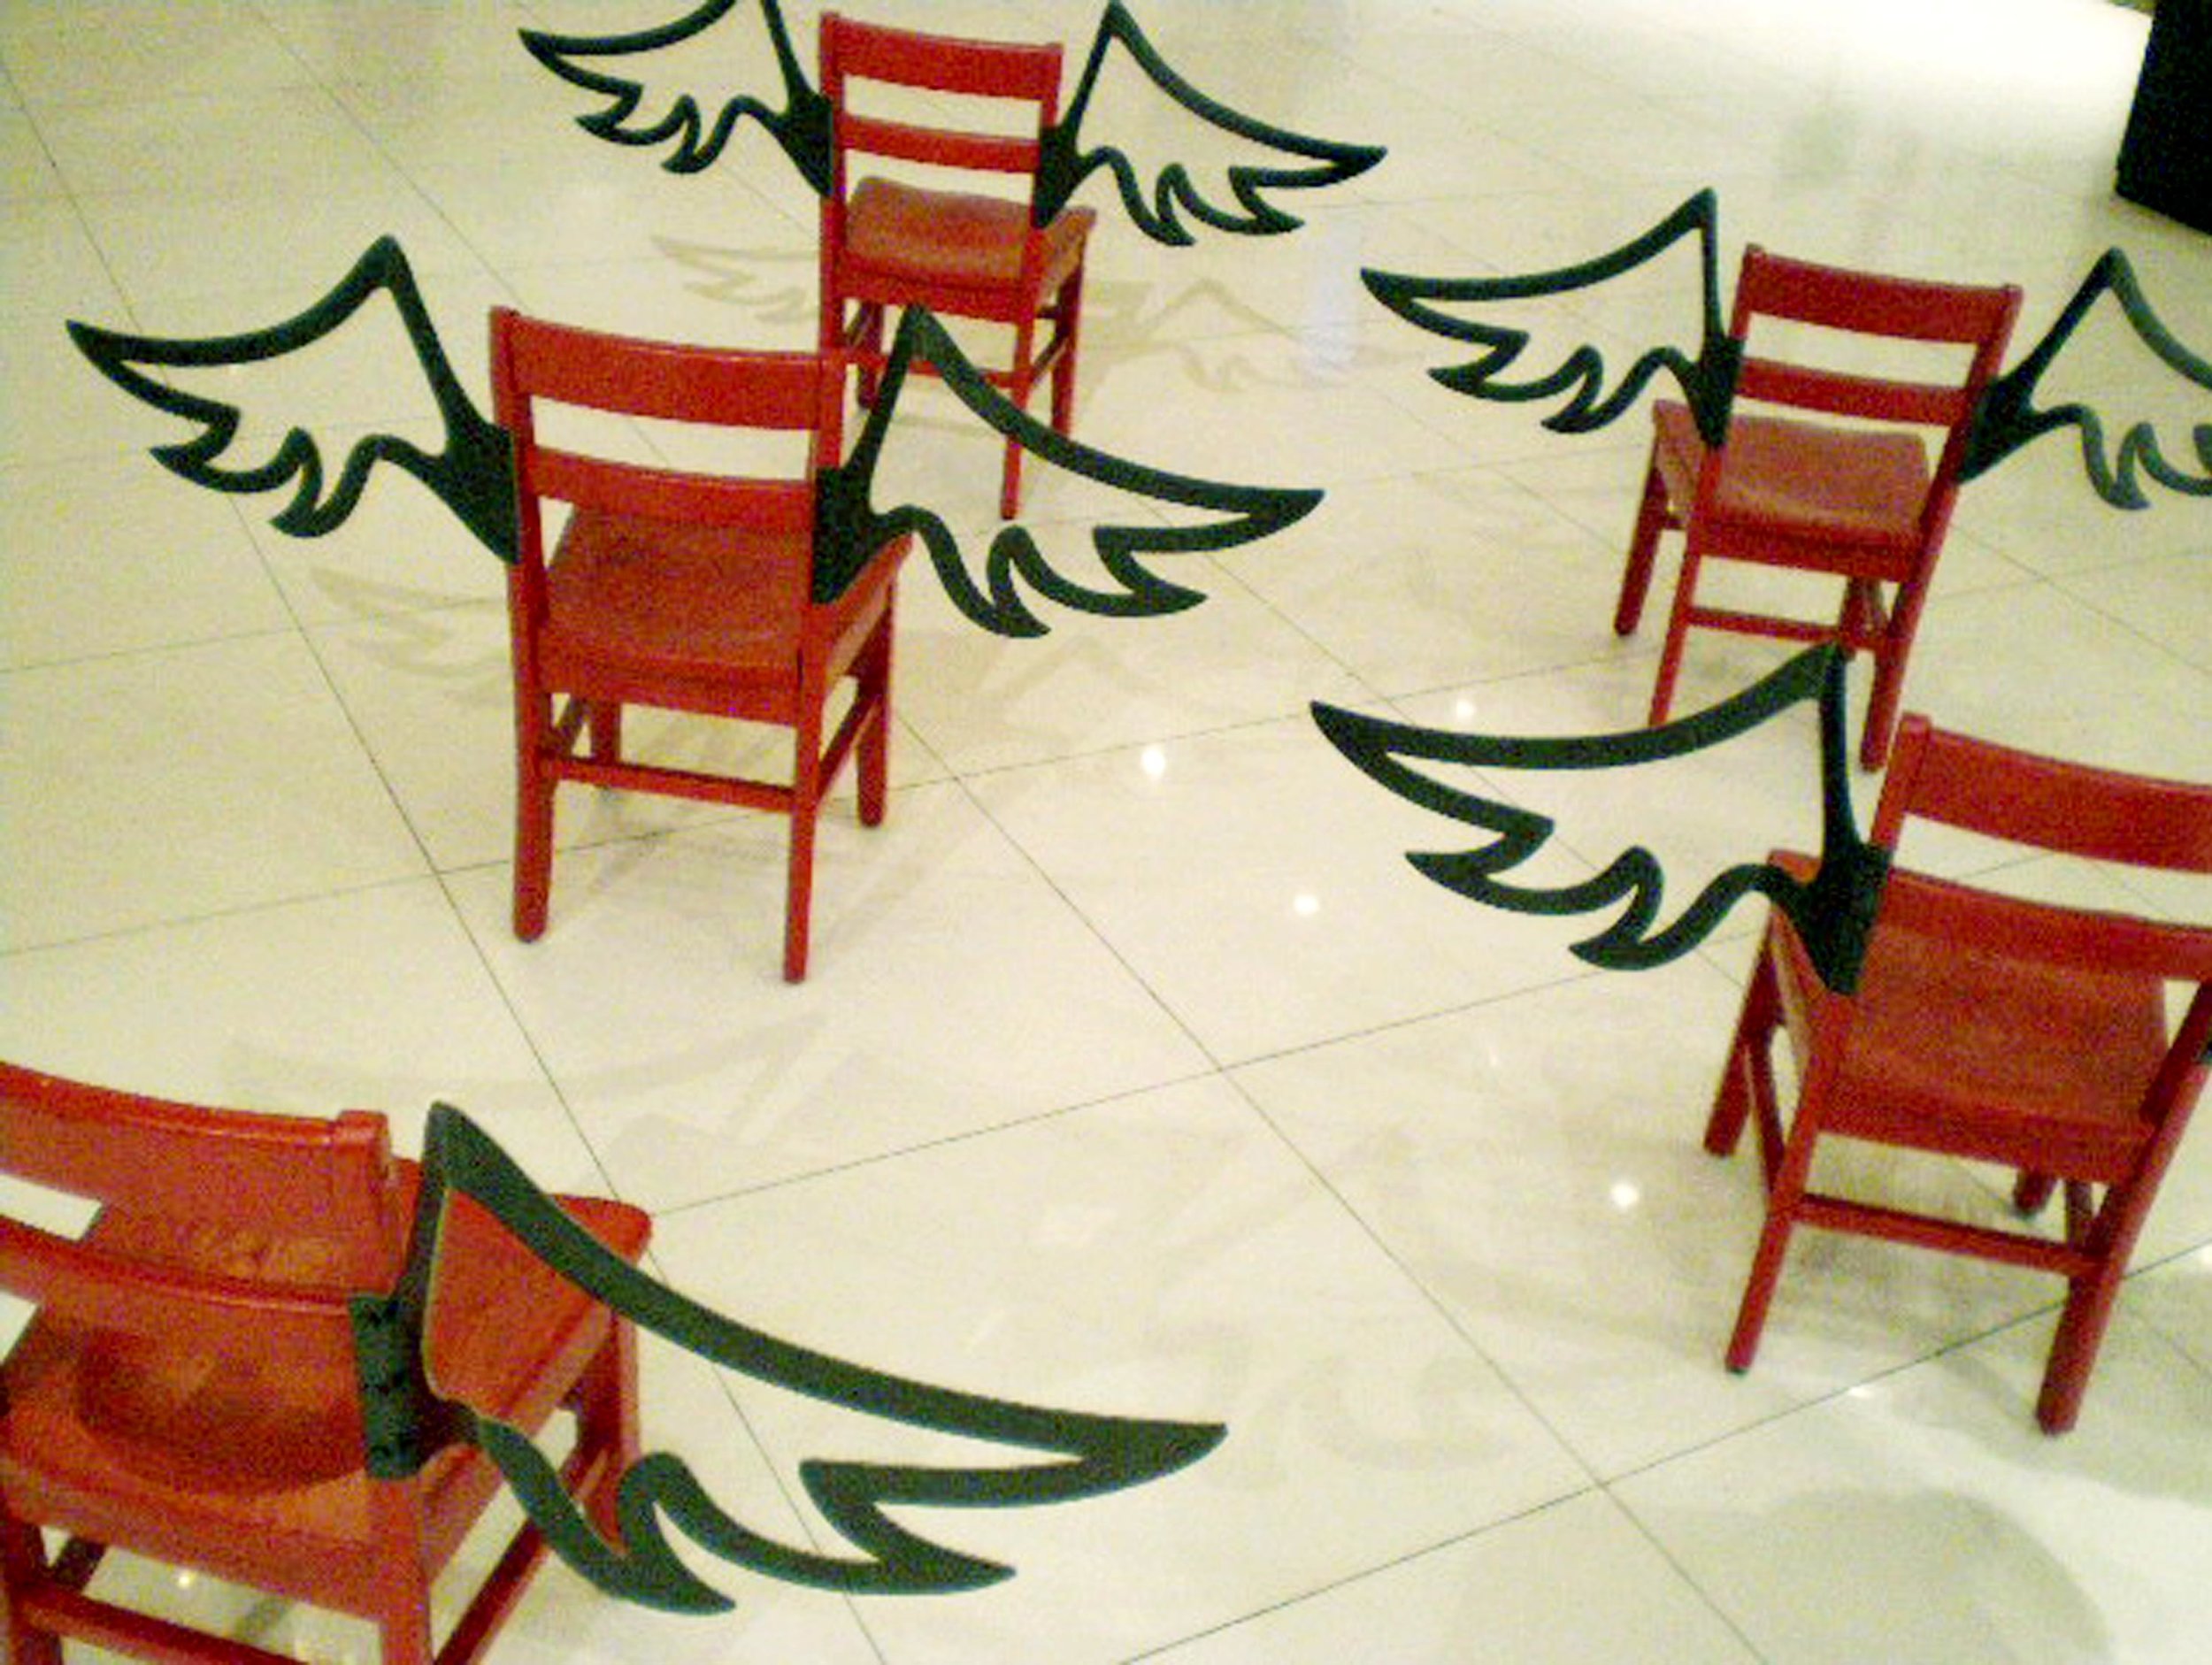    Good Intentions Aren't Enough   Mixed Media Installation: Wooden chairs and fabricated steel wings 44in x 26.5in x 14in deep 